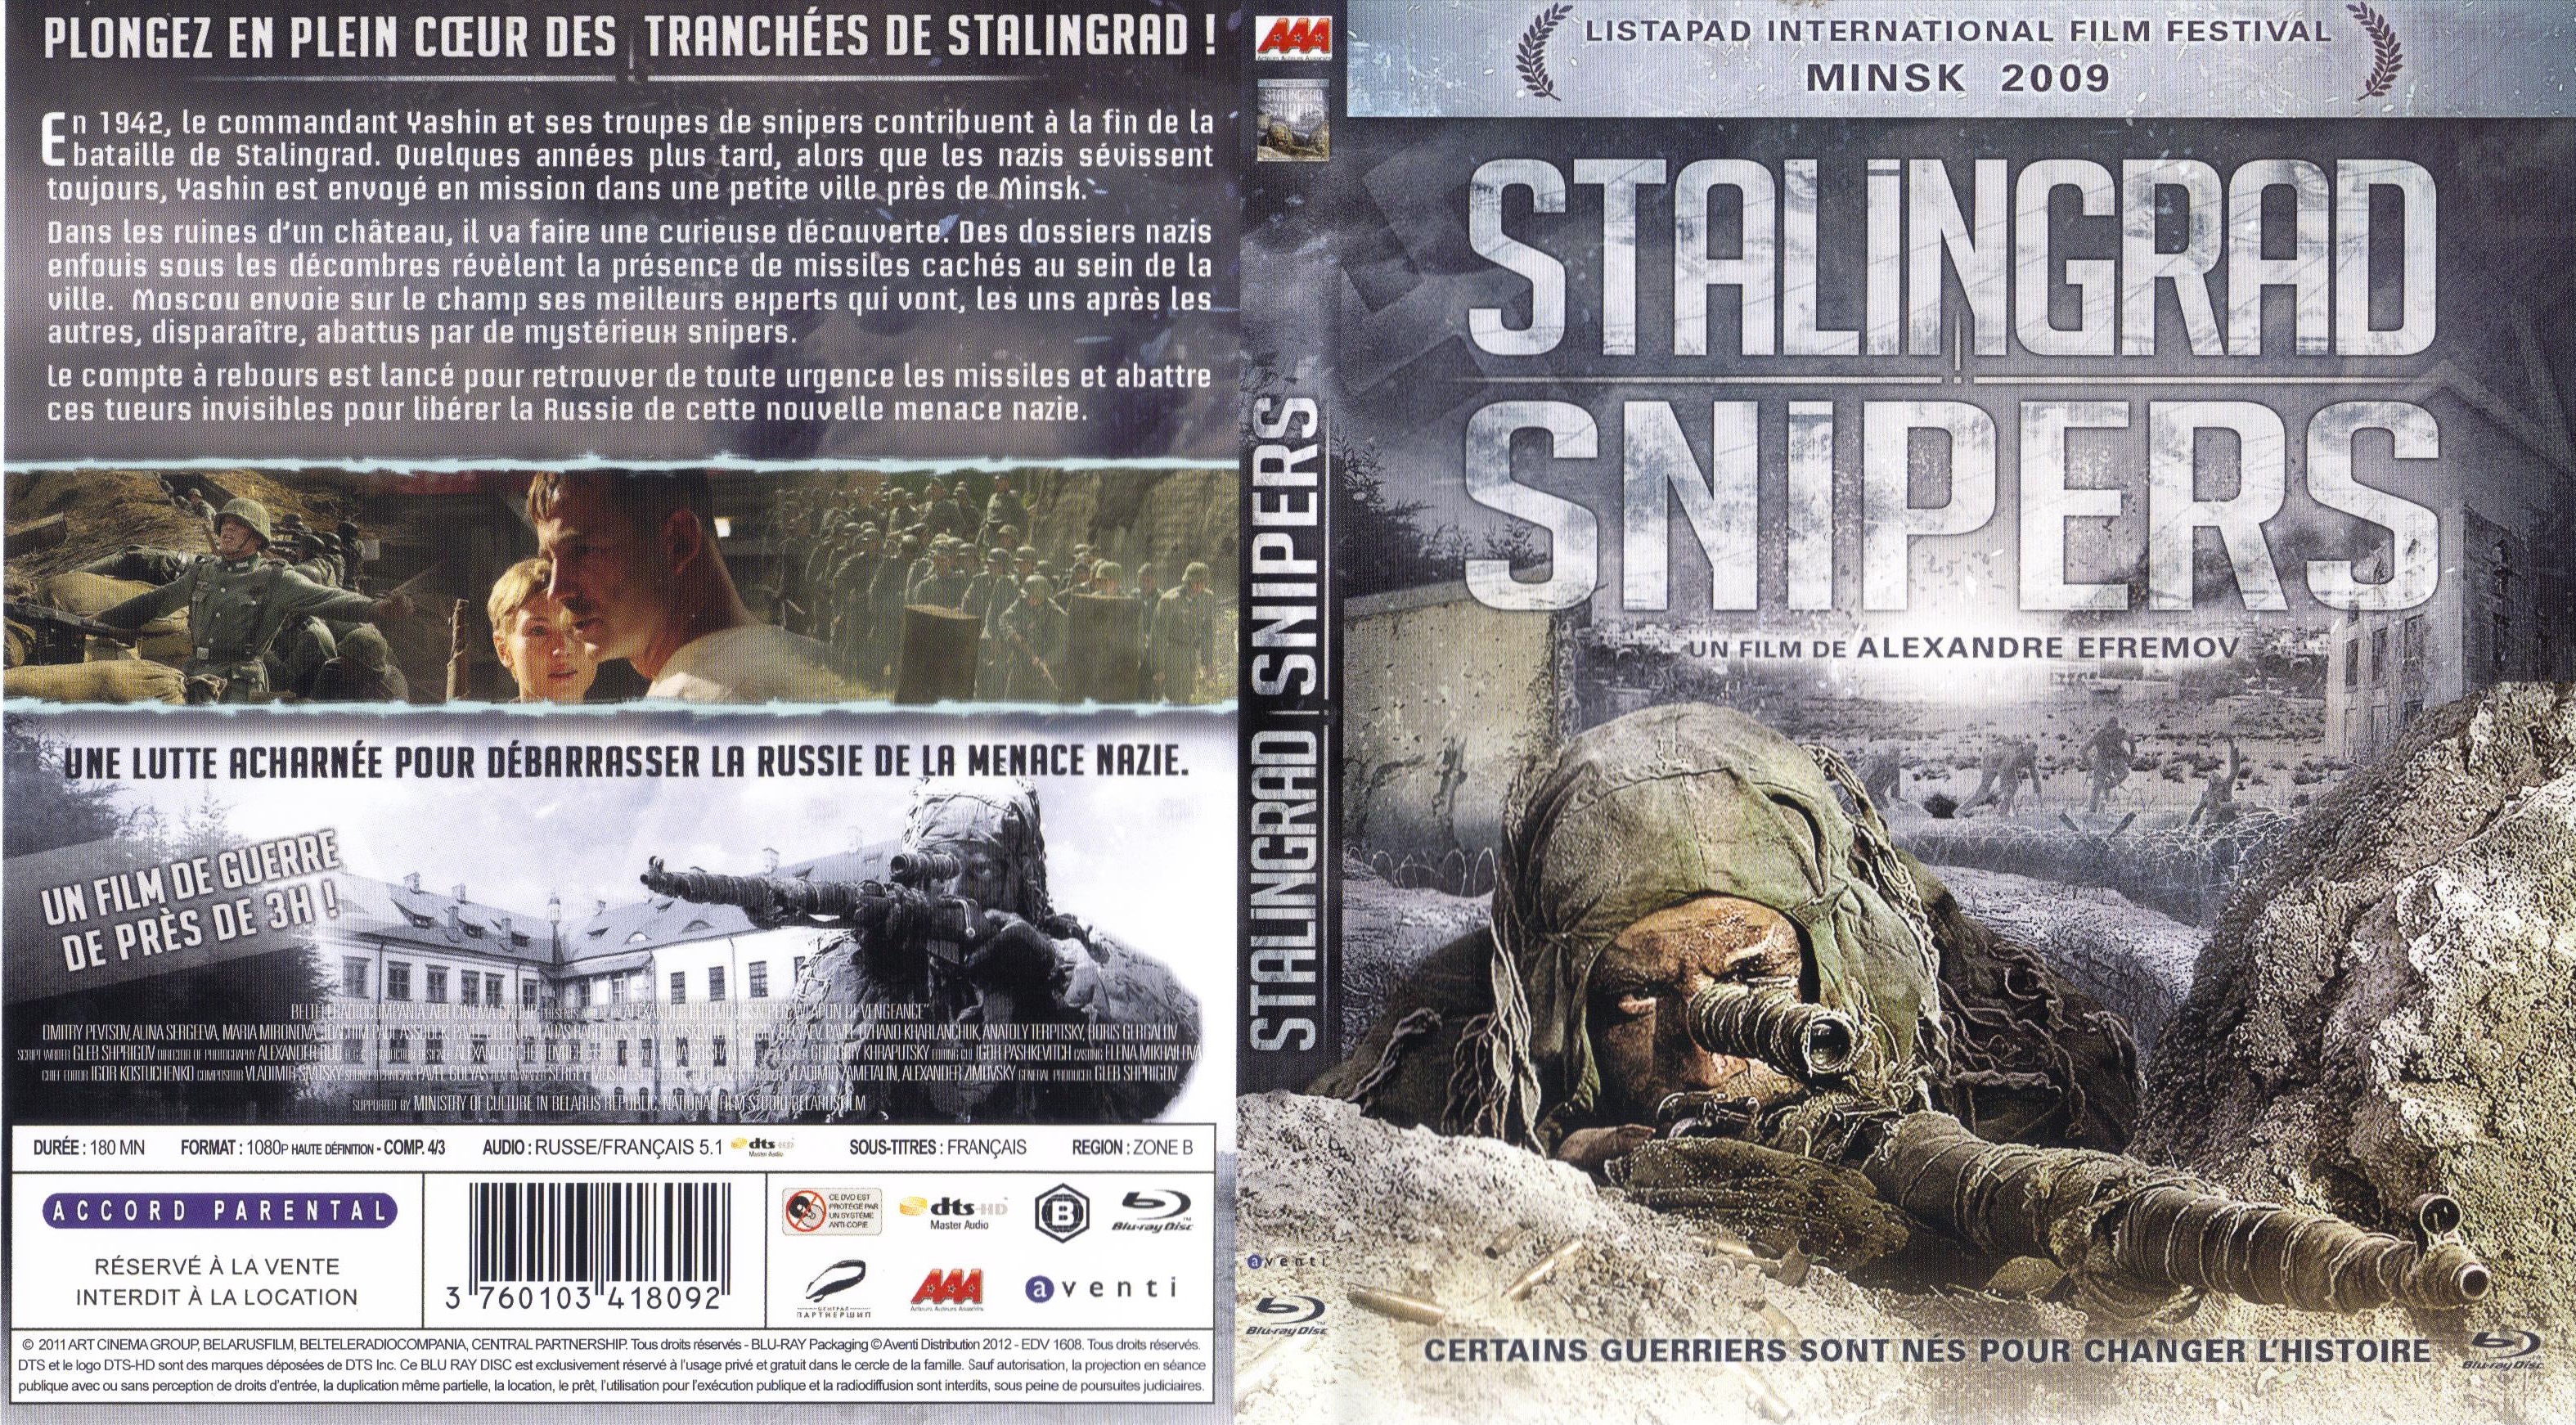 Jaquette DVD Stalingrad snipers (BLU-RAY)